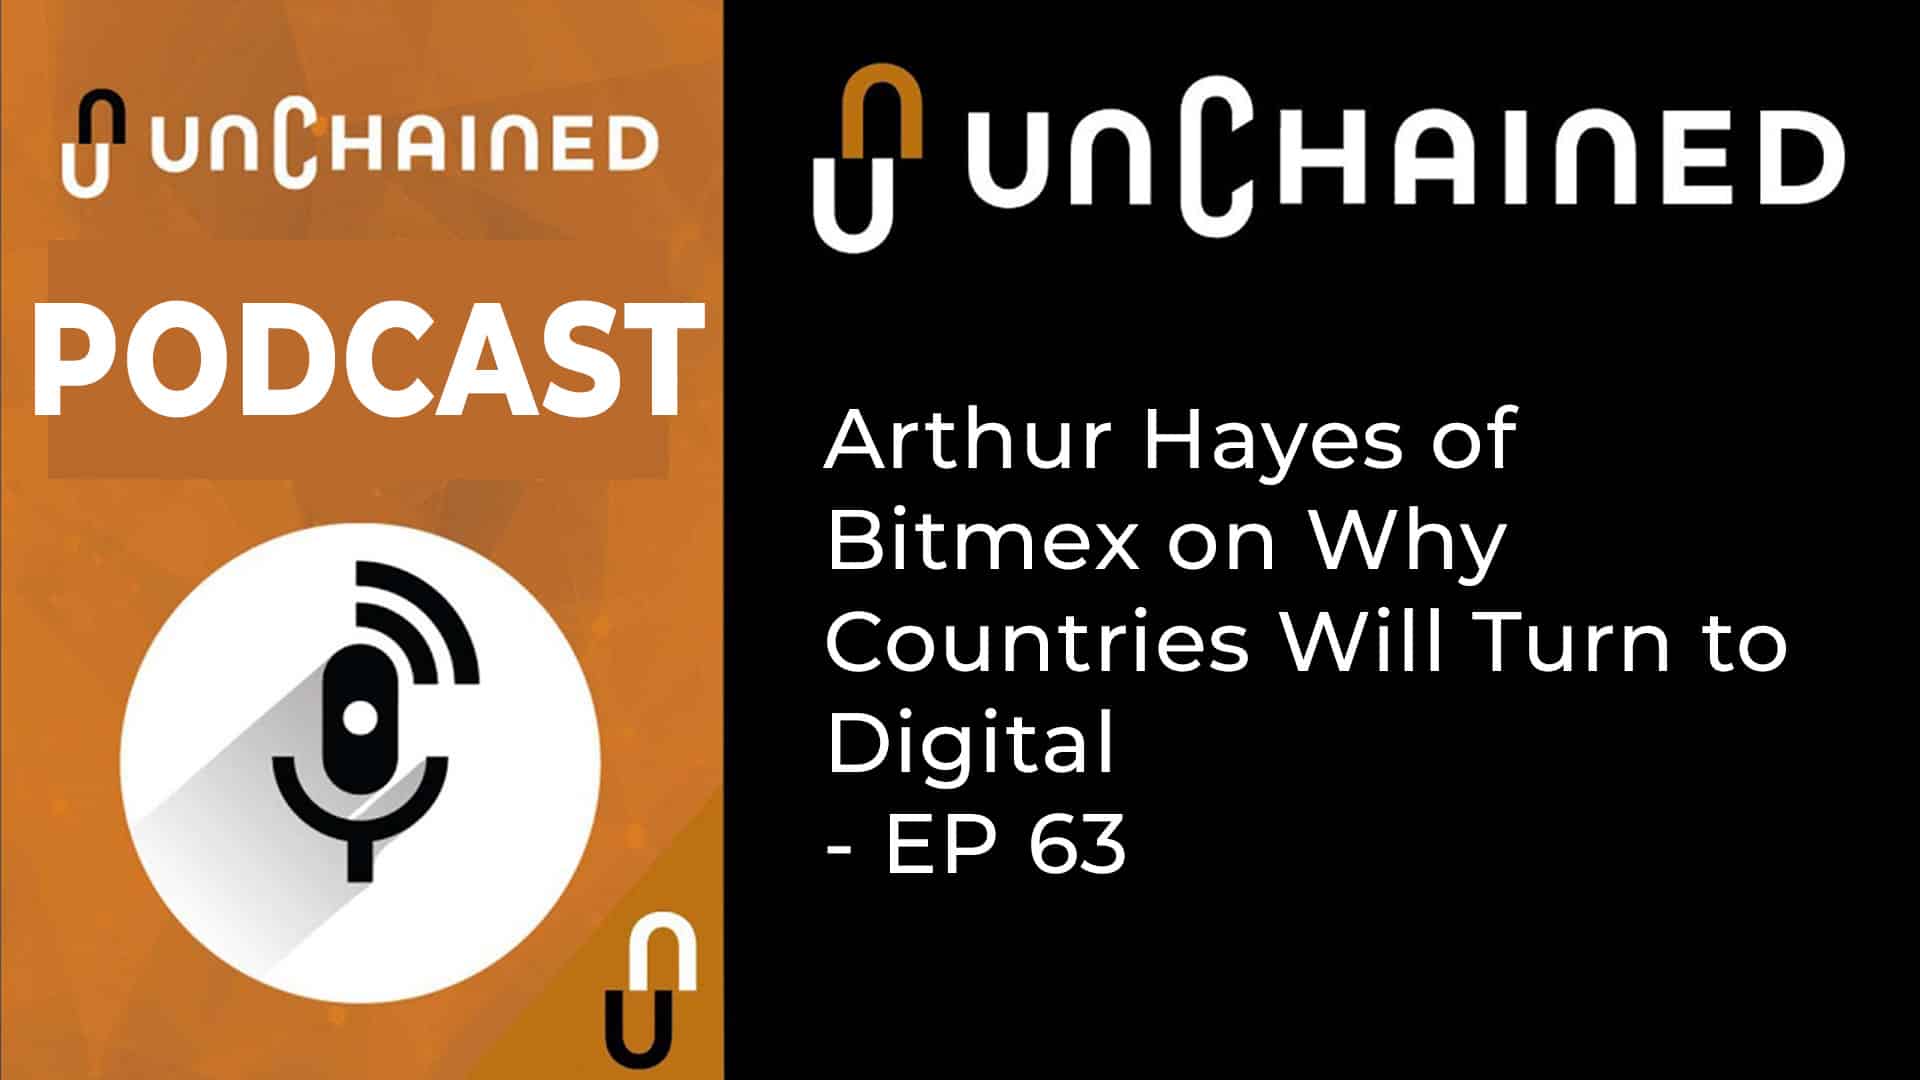 Arthur Hayes of Bitmex on Why Countries Will Turn to Digital